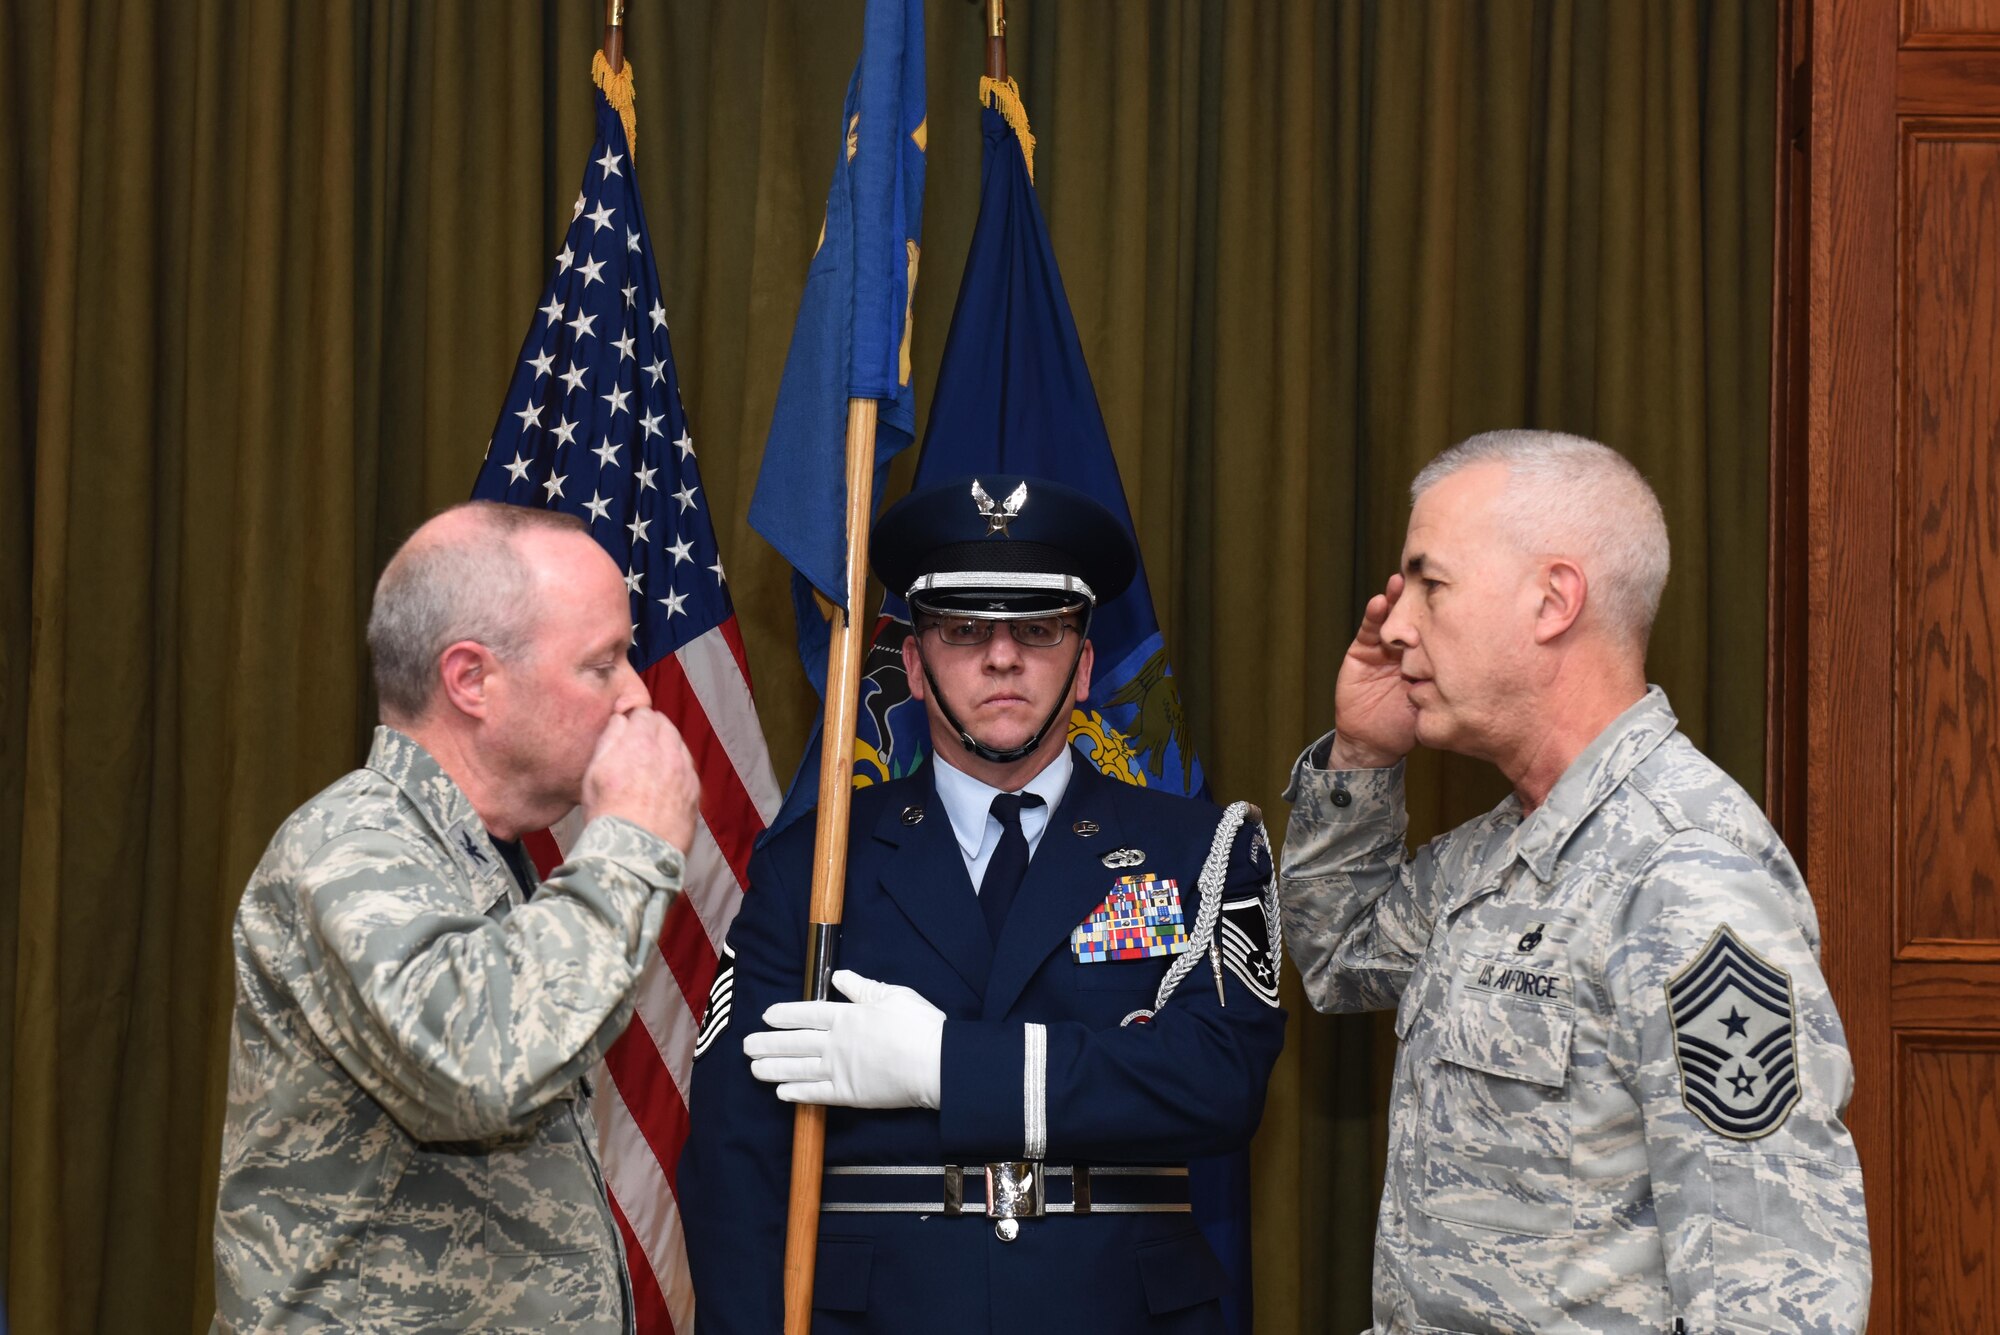 Former State Command Chief Master Sgt. Victor Guerra salutes Col. Mike Regan, Commander, Pennsylvania Air National Guard, as he states, “Sir, I relinquish responsibility,” as he retires from the position he’s held since October 2011. The change of responsibly ceremony includes the passing of the guidon, a symbolic representation of the relinquishment and acceptance of the position, as well as verbal acknowledgement of the position change. (U.S. Air National Guard Photo by Tech. Sgt. Claire Behney/Released)